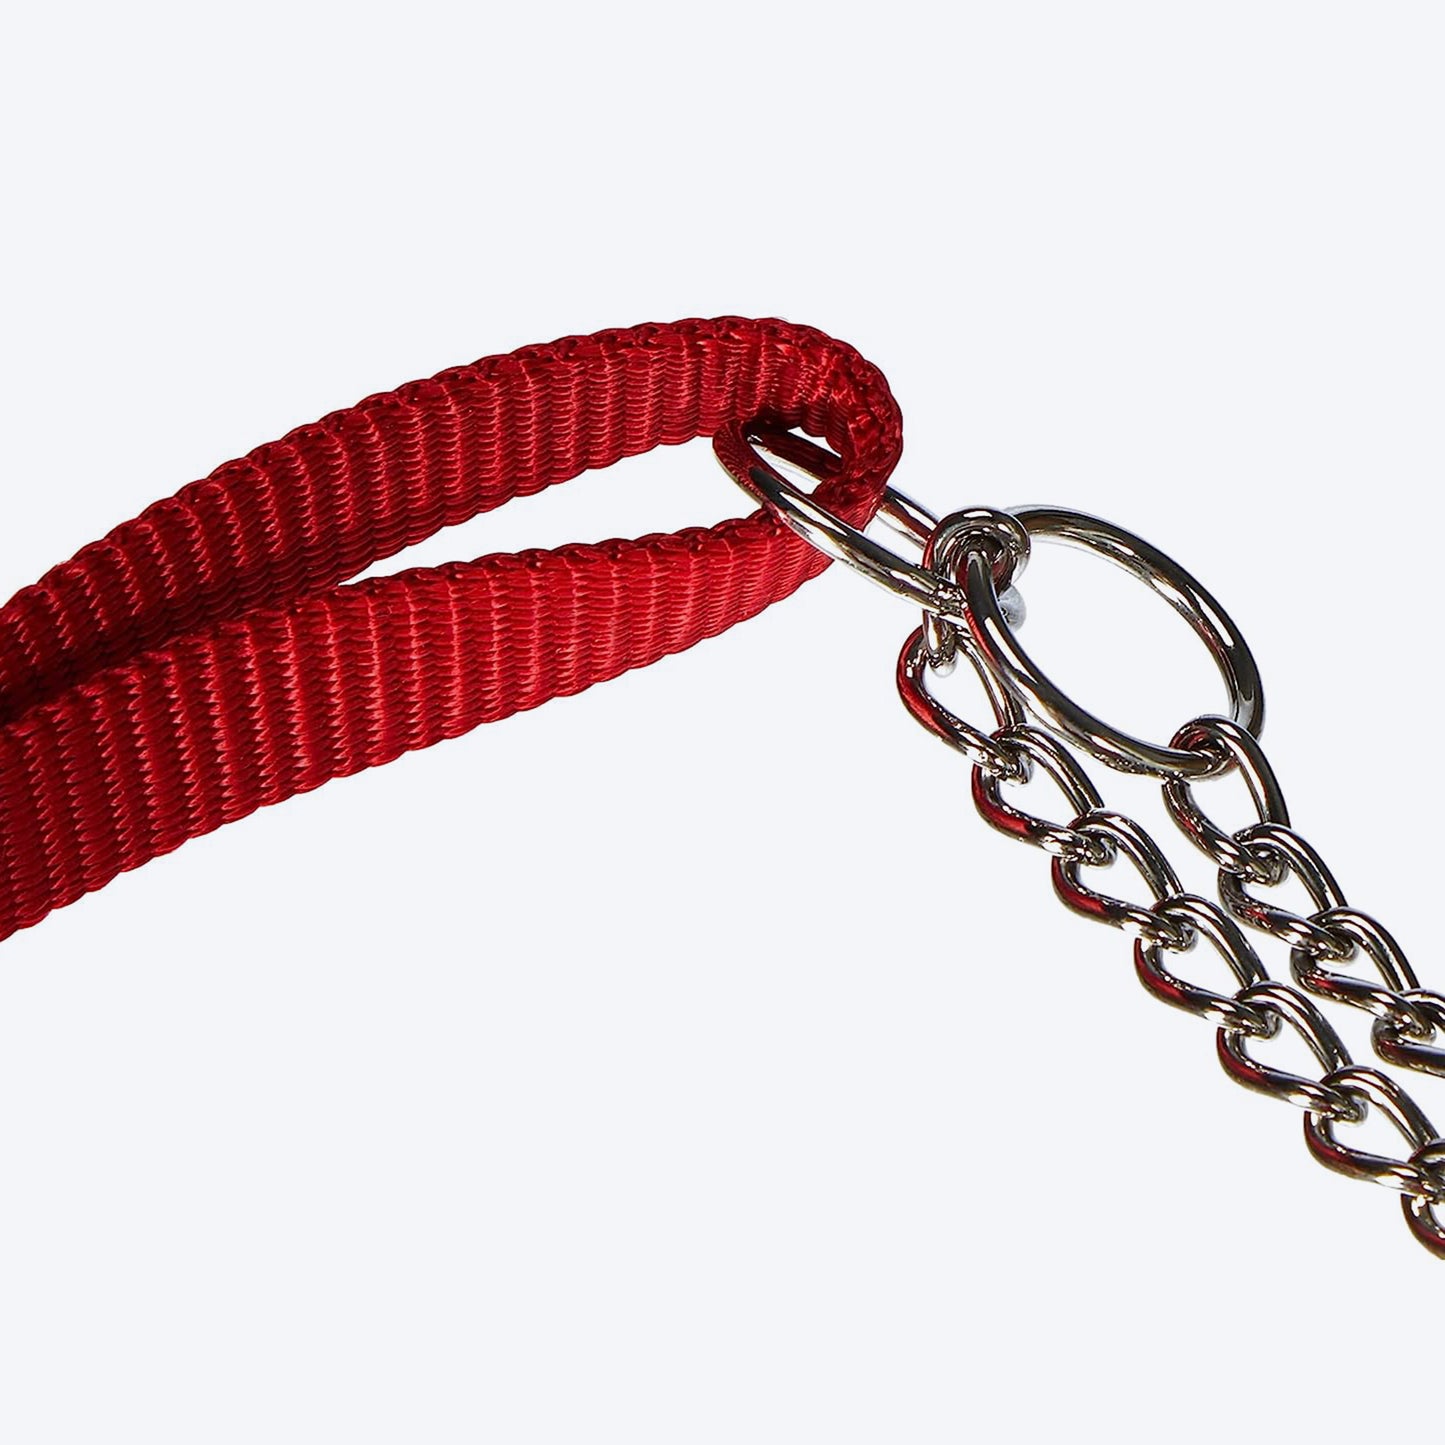 Trixie Premium Stop-The-Pull Collar - Cherry Red - Heads Up For Tails